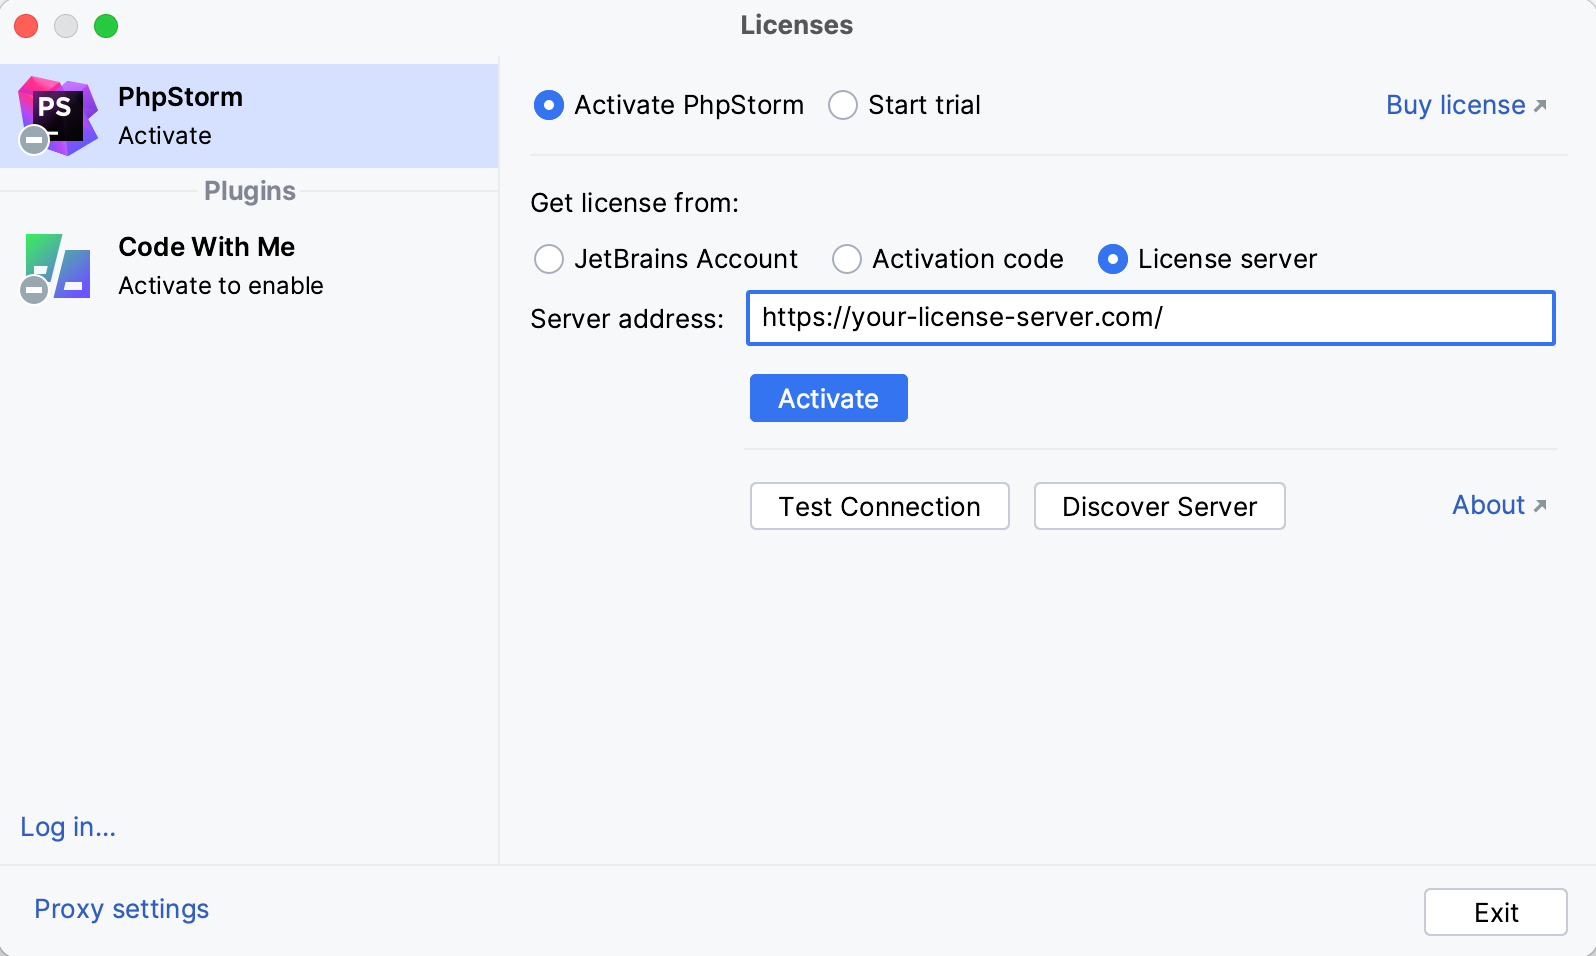 Activate PhpStorm license with a license server